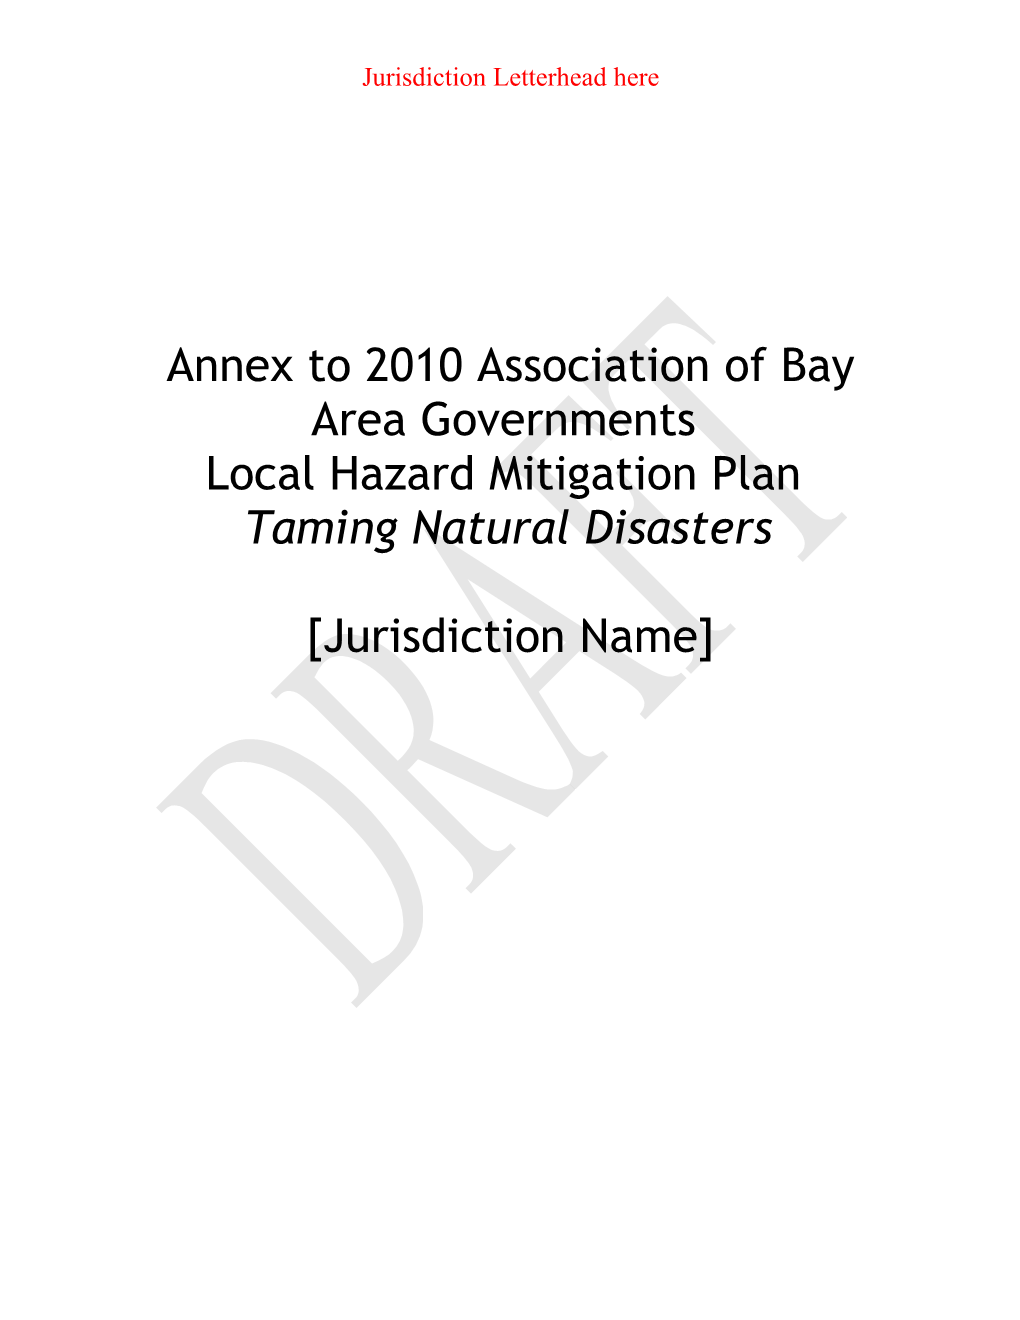 Annex to 2010 Association of Bay Area Governments